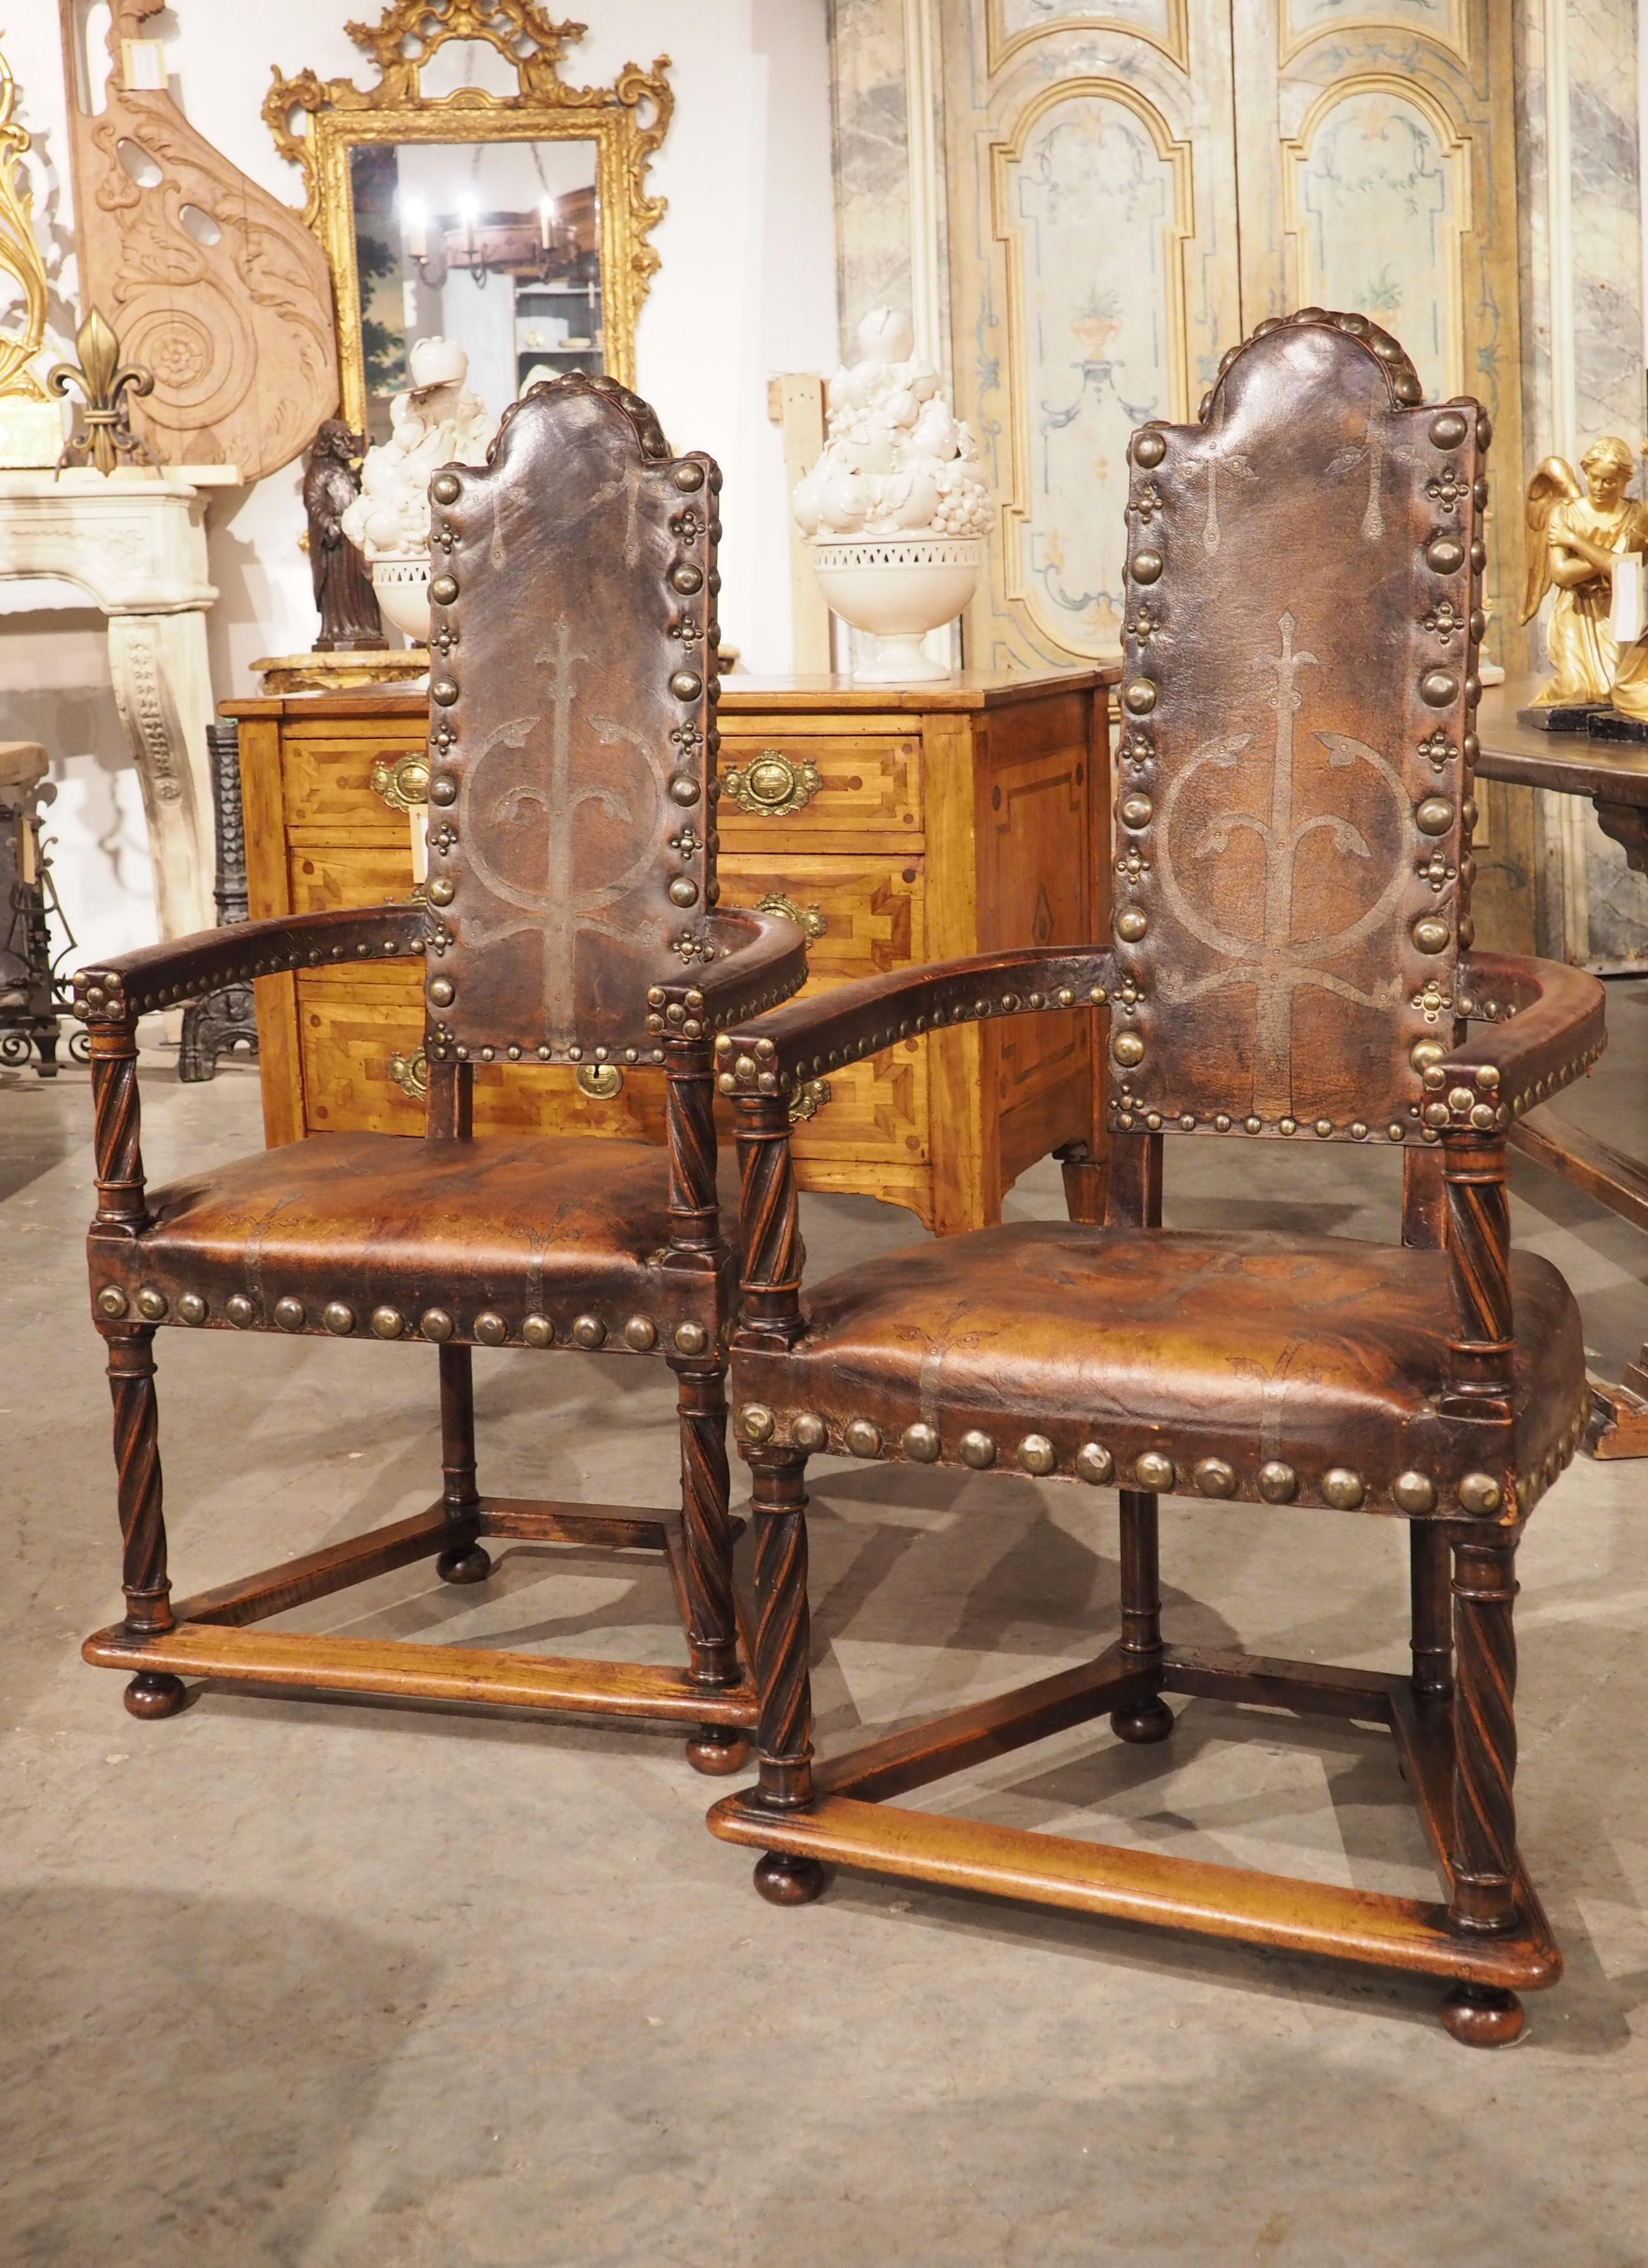 Medieval A Unique Pair of 19th Century Studded Leather Armchairs from Spain